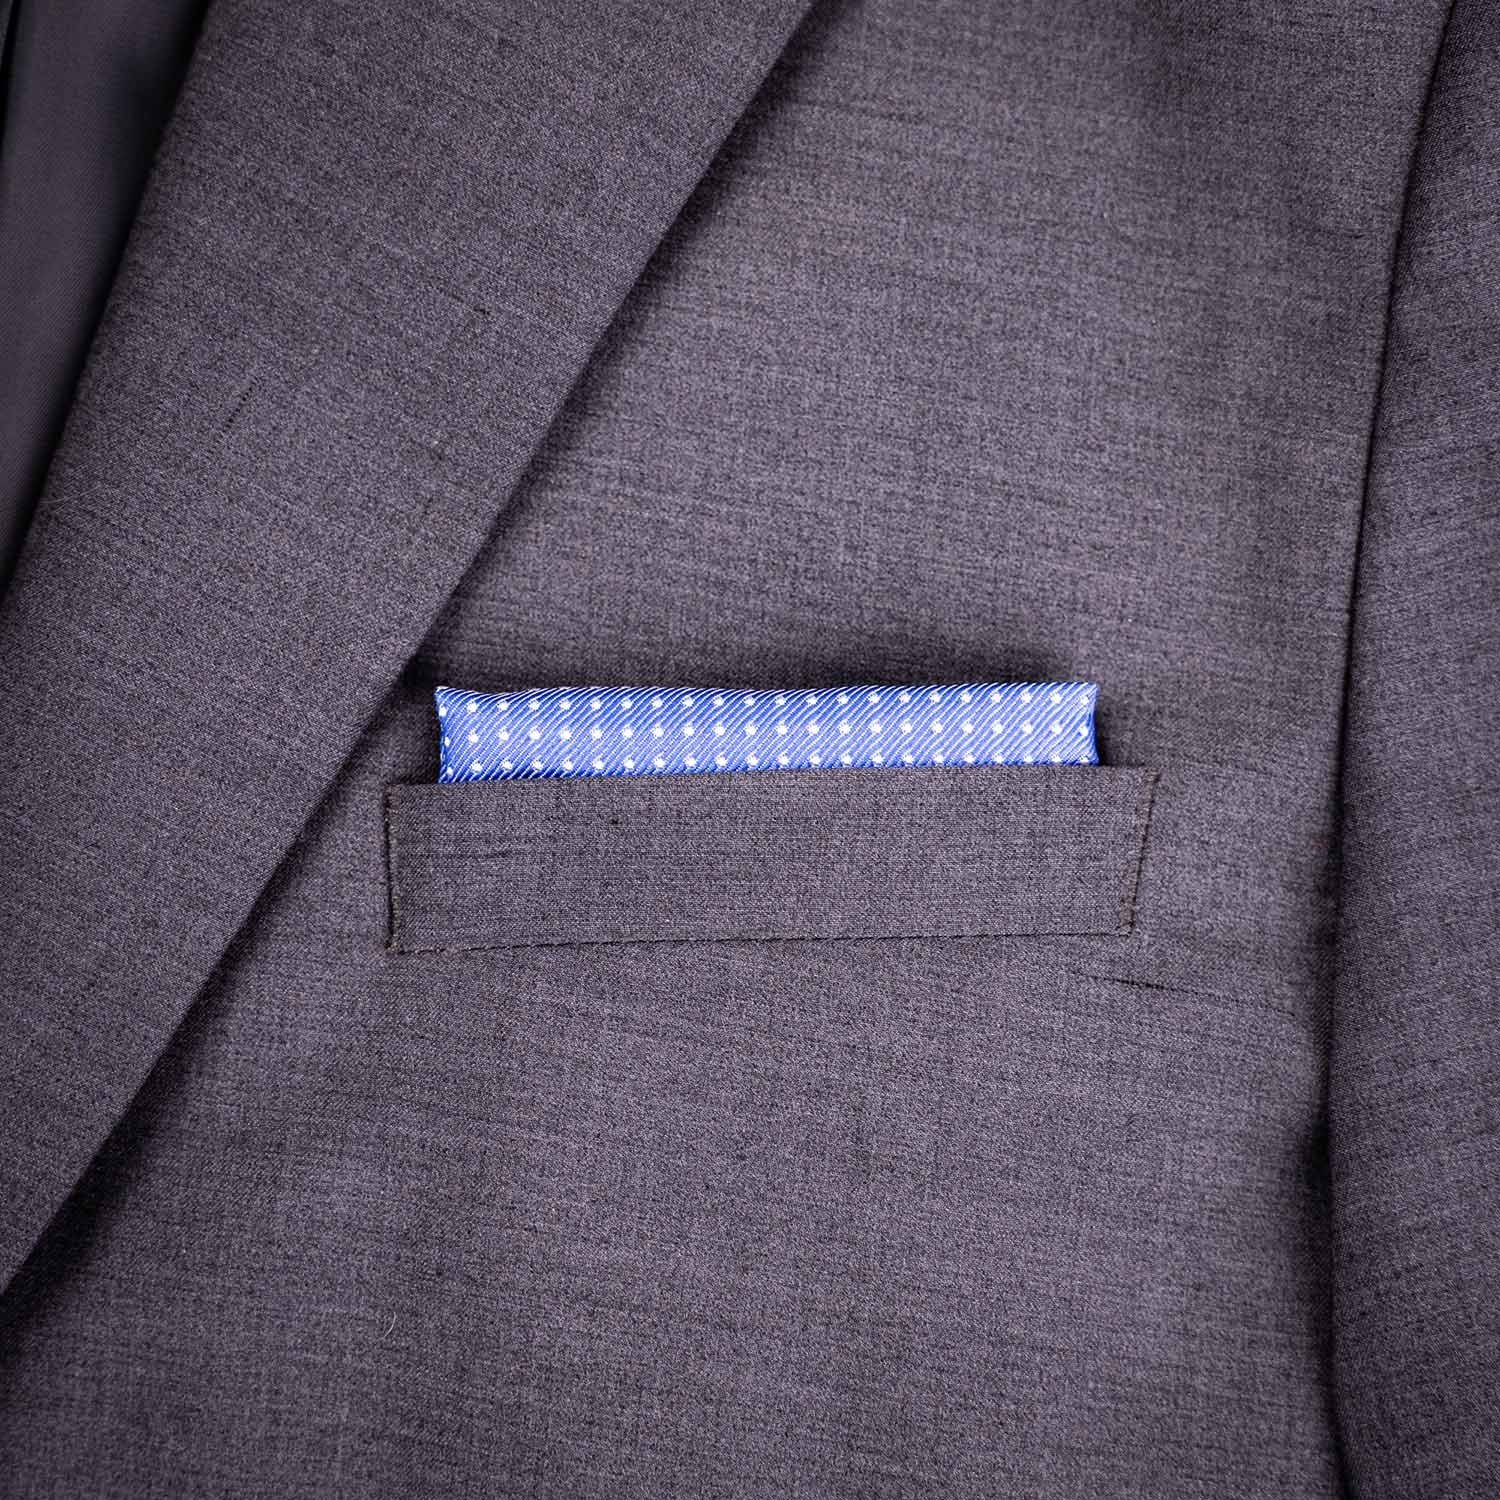 White and blue pattern pocket square for navy suit